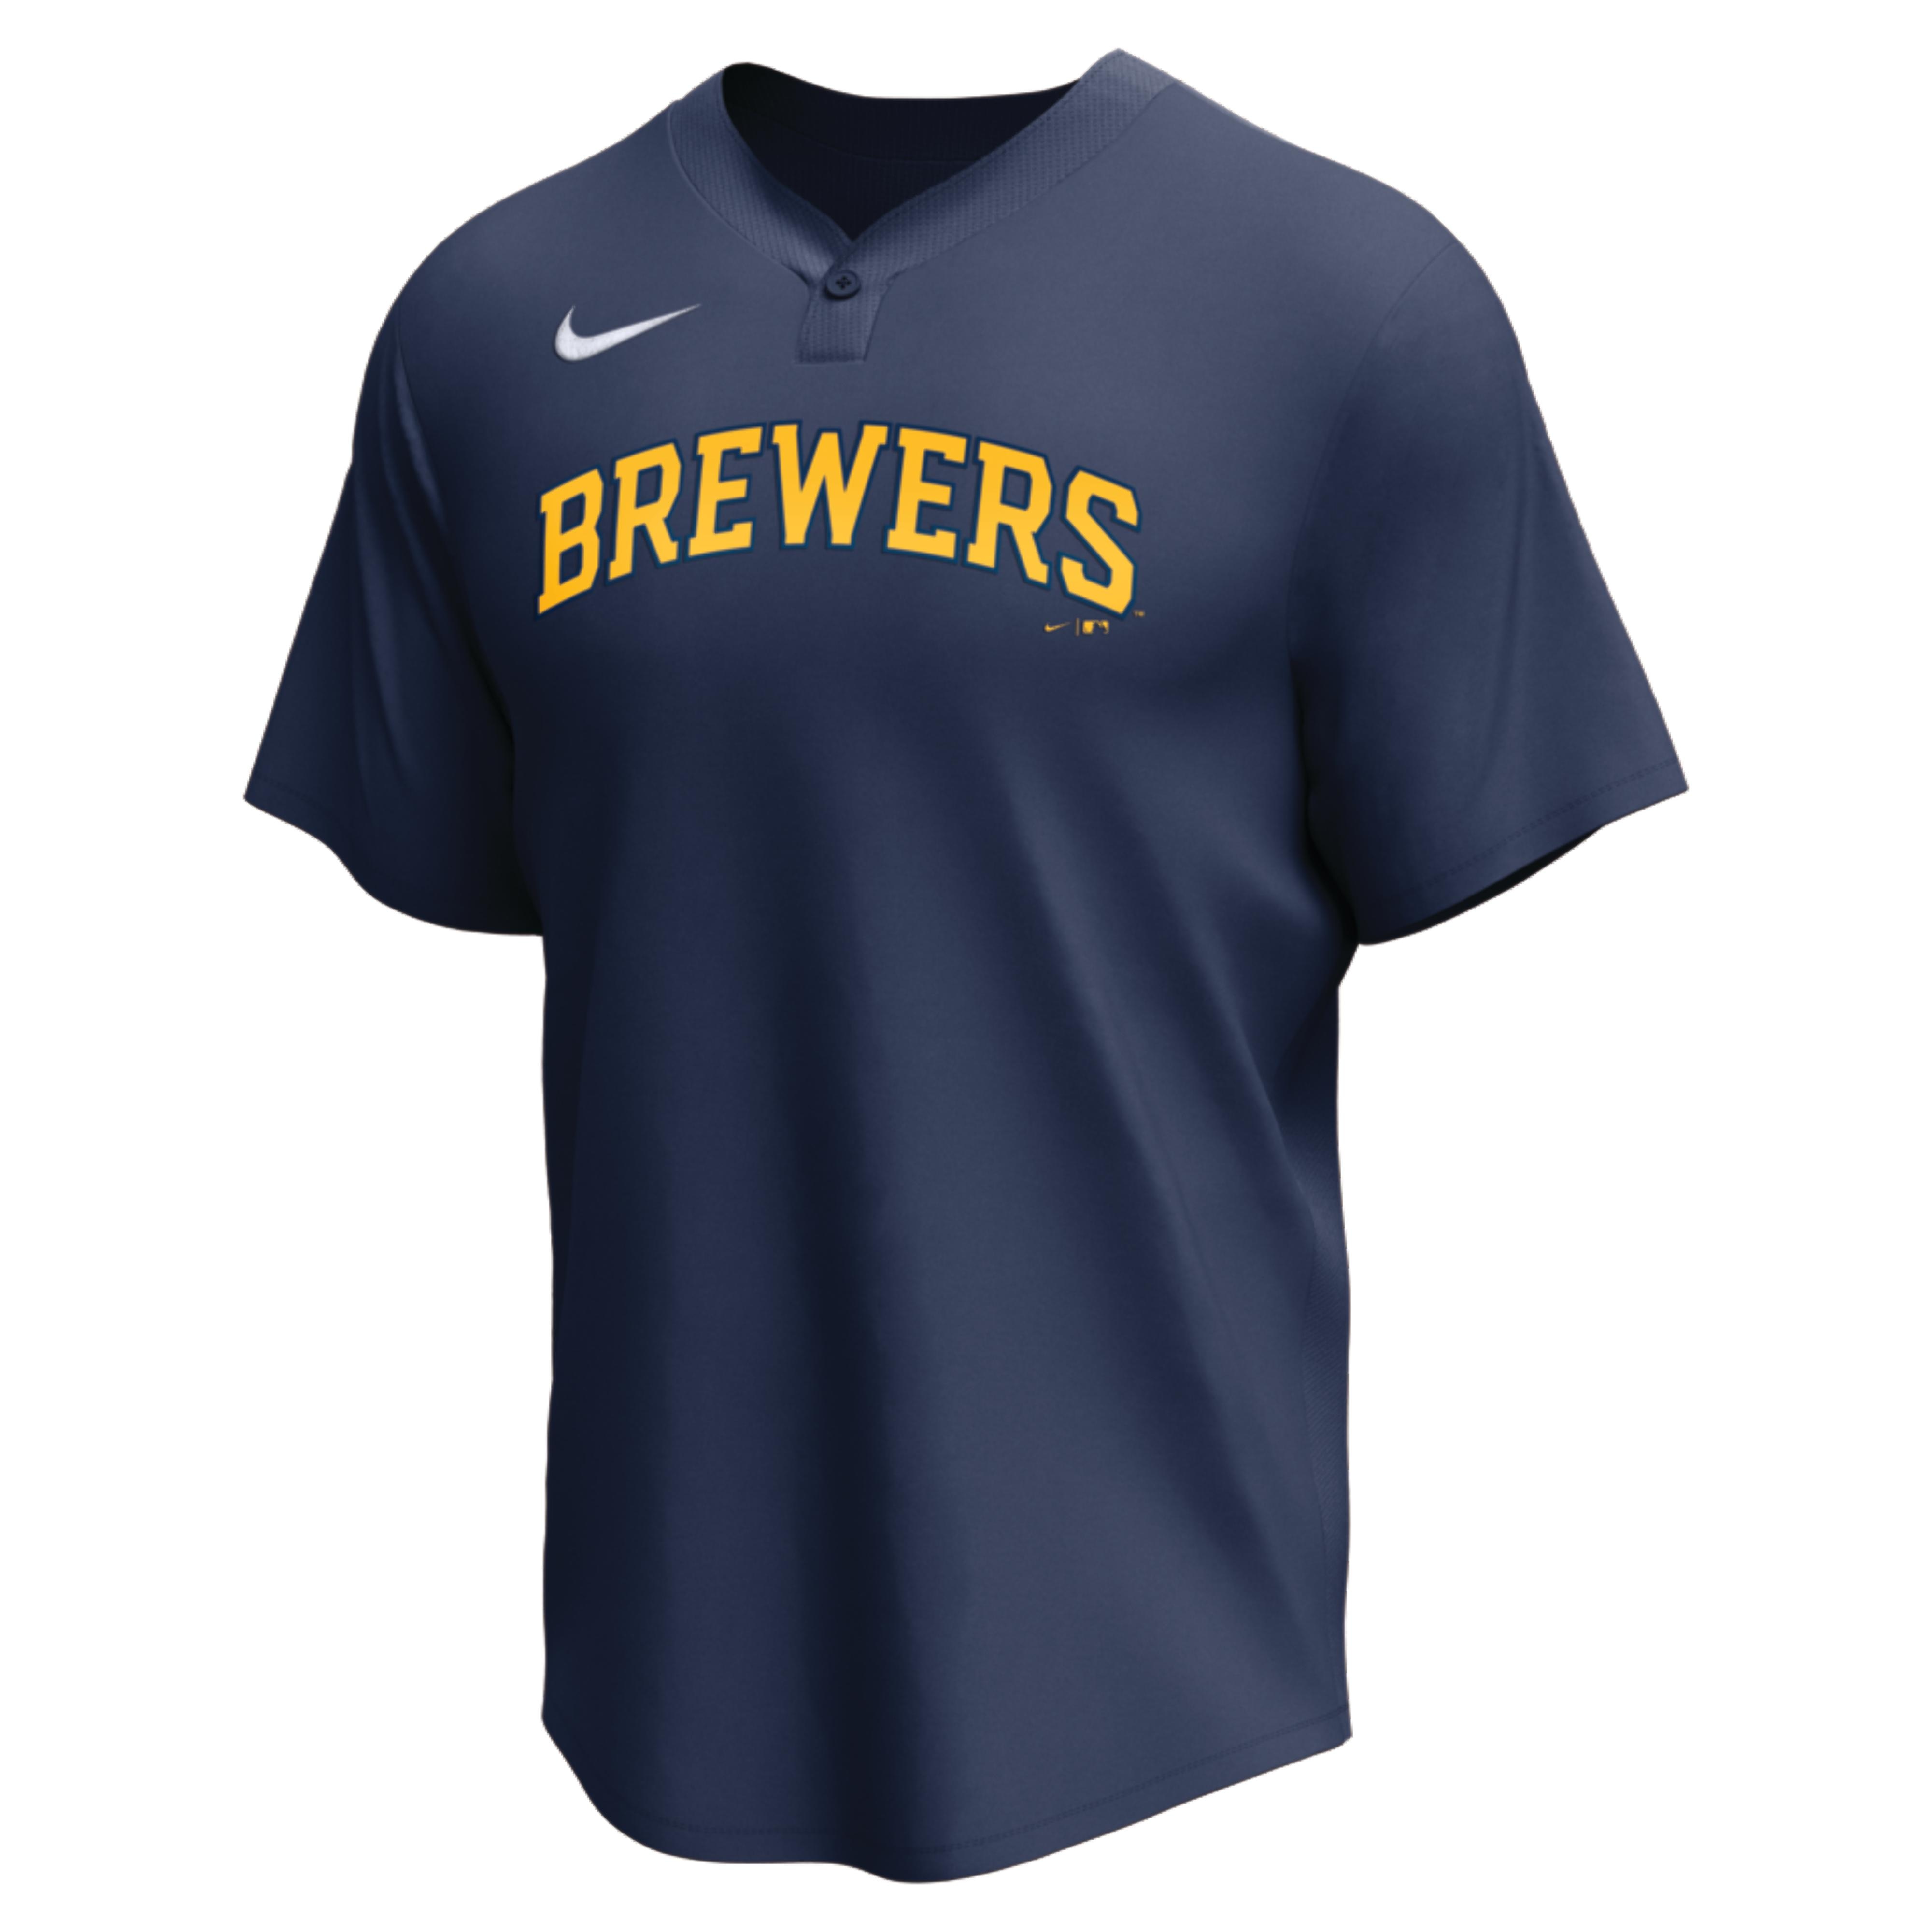 These new Brewers jerseys are absolute fire 🔥 #brewers